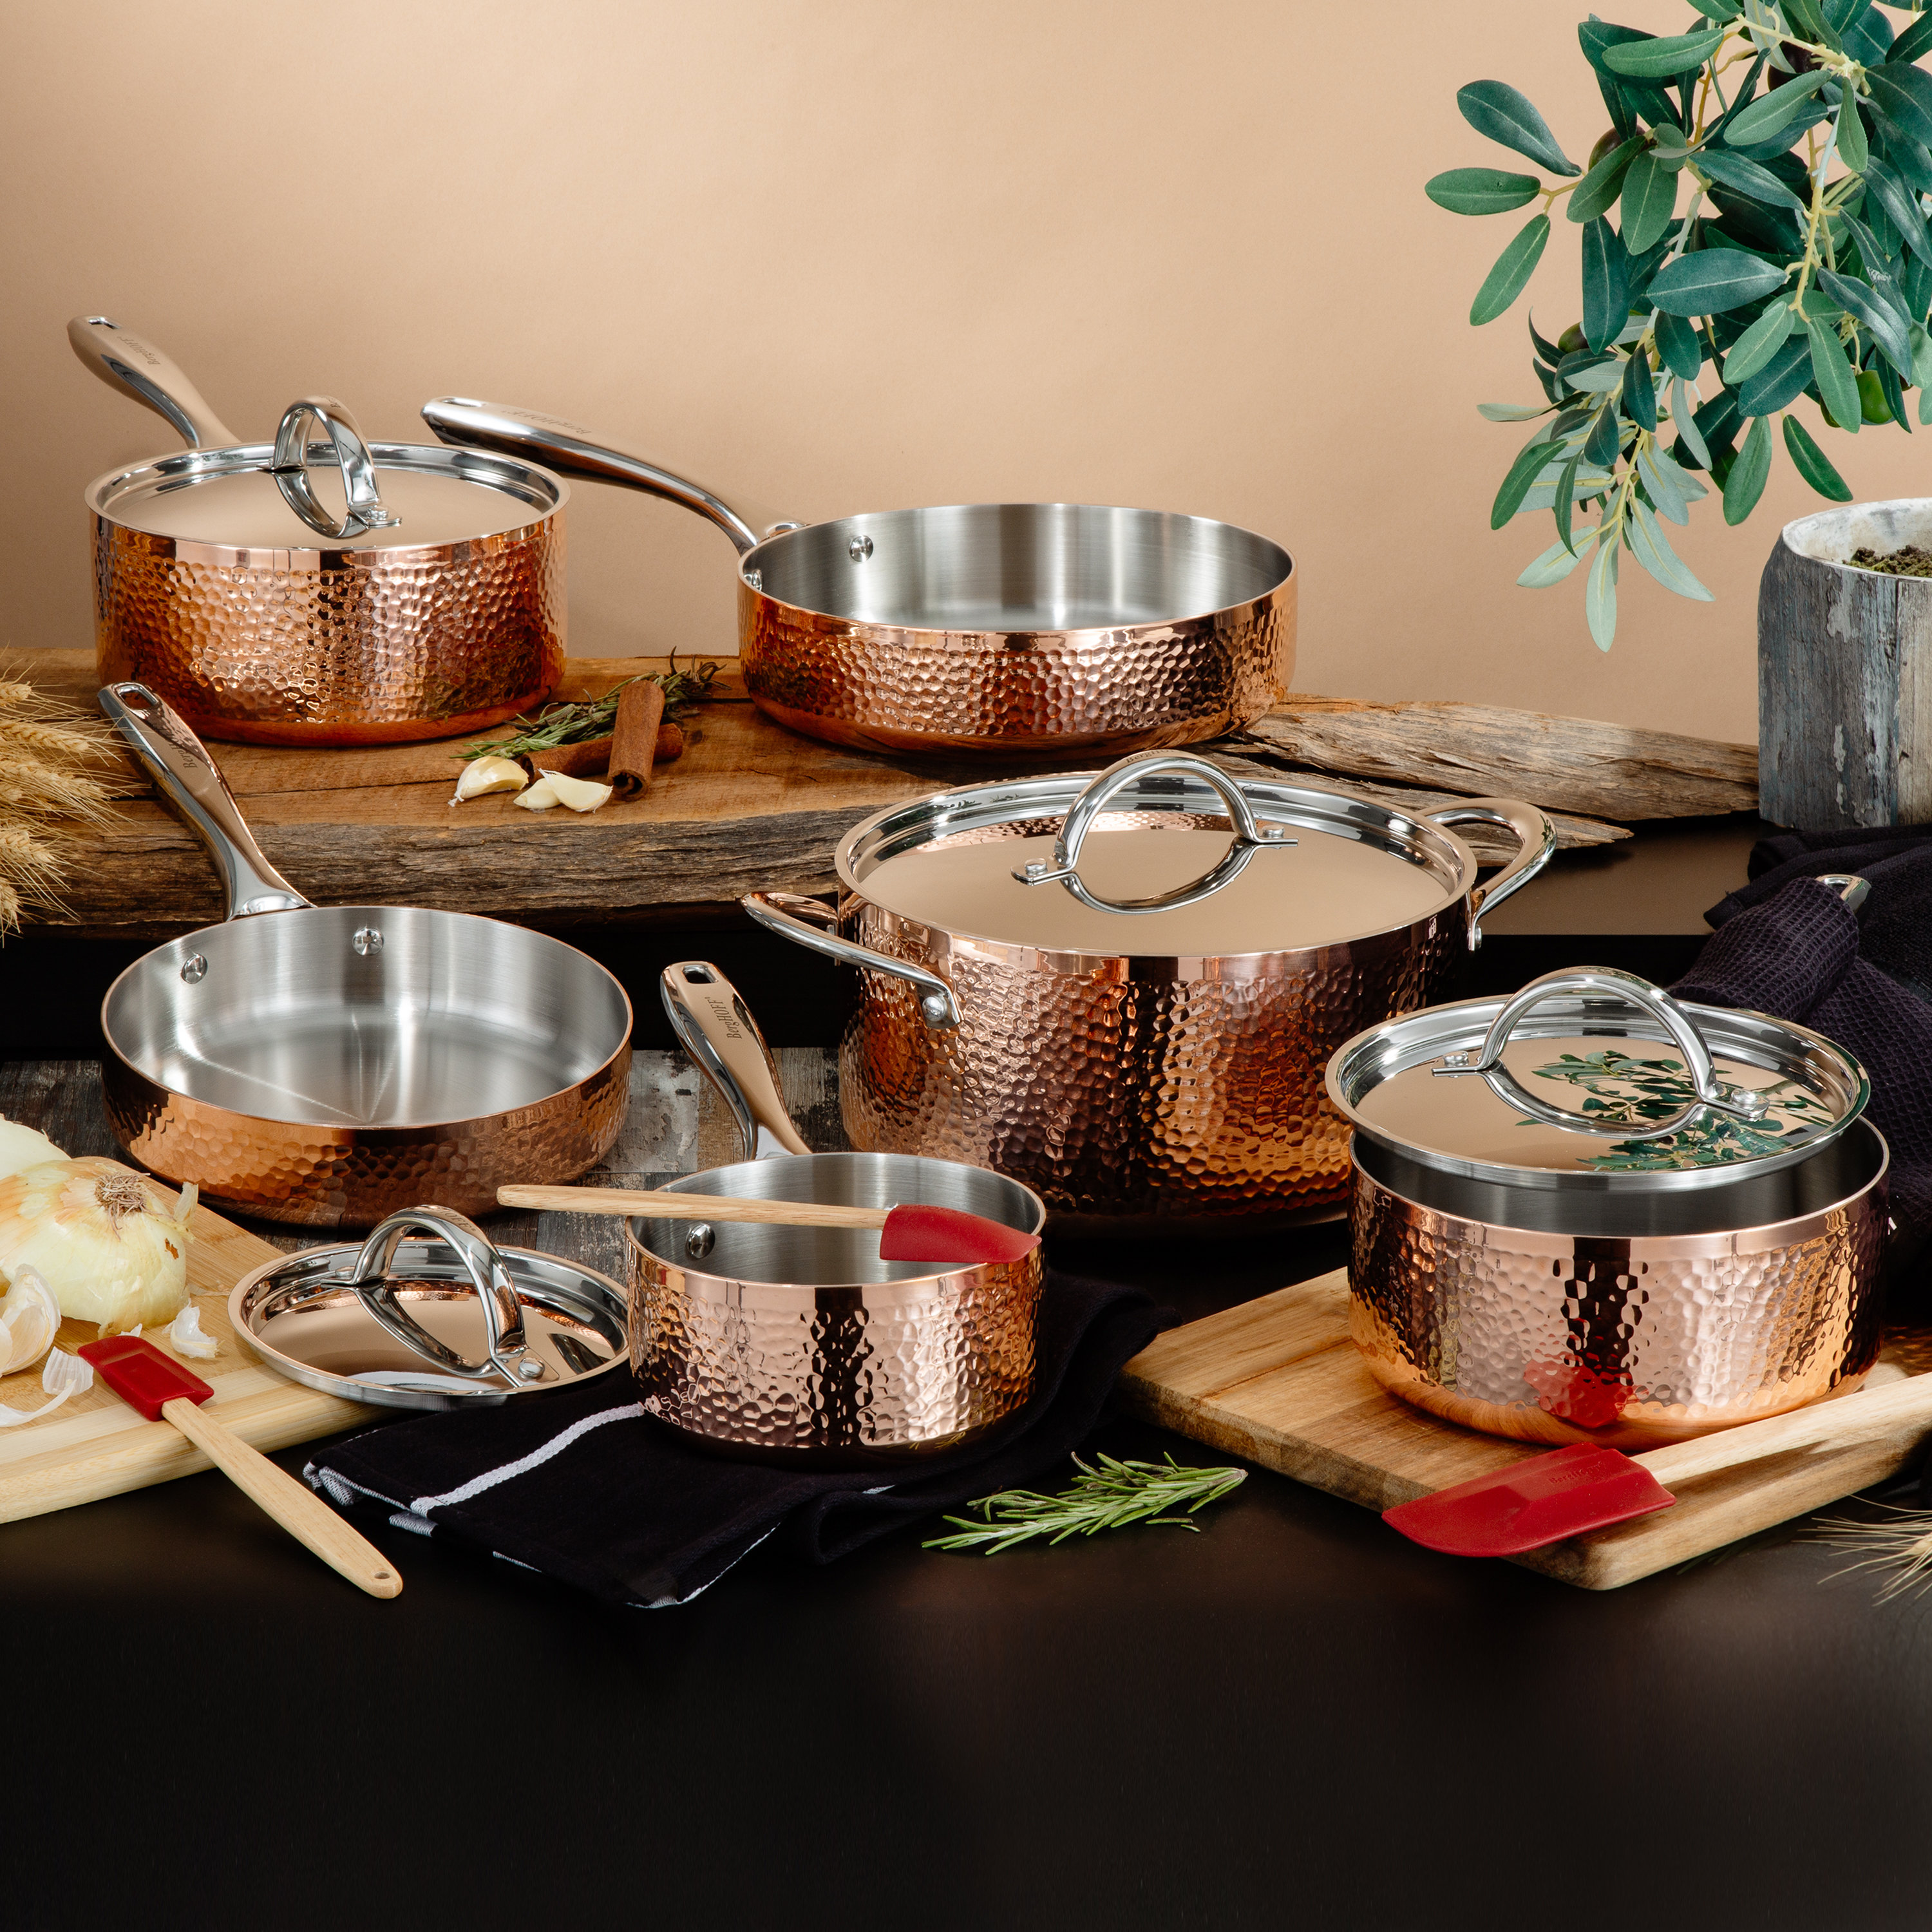 BergHOFF Copper Tri-Ply 13Pc Cookware Set, Polished, Hammered